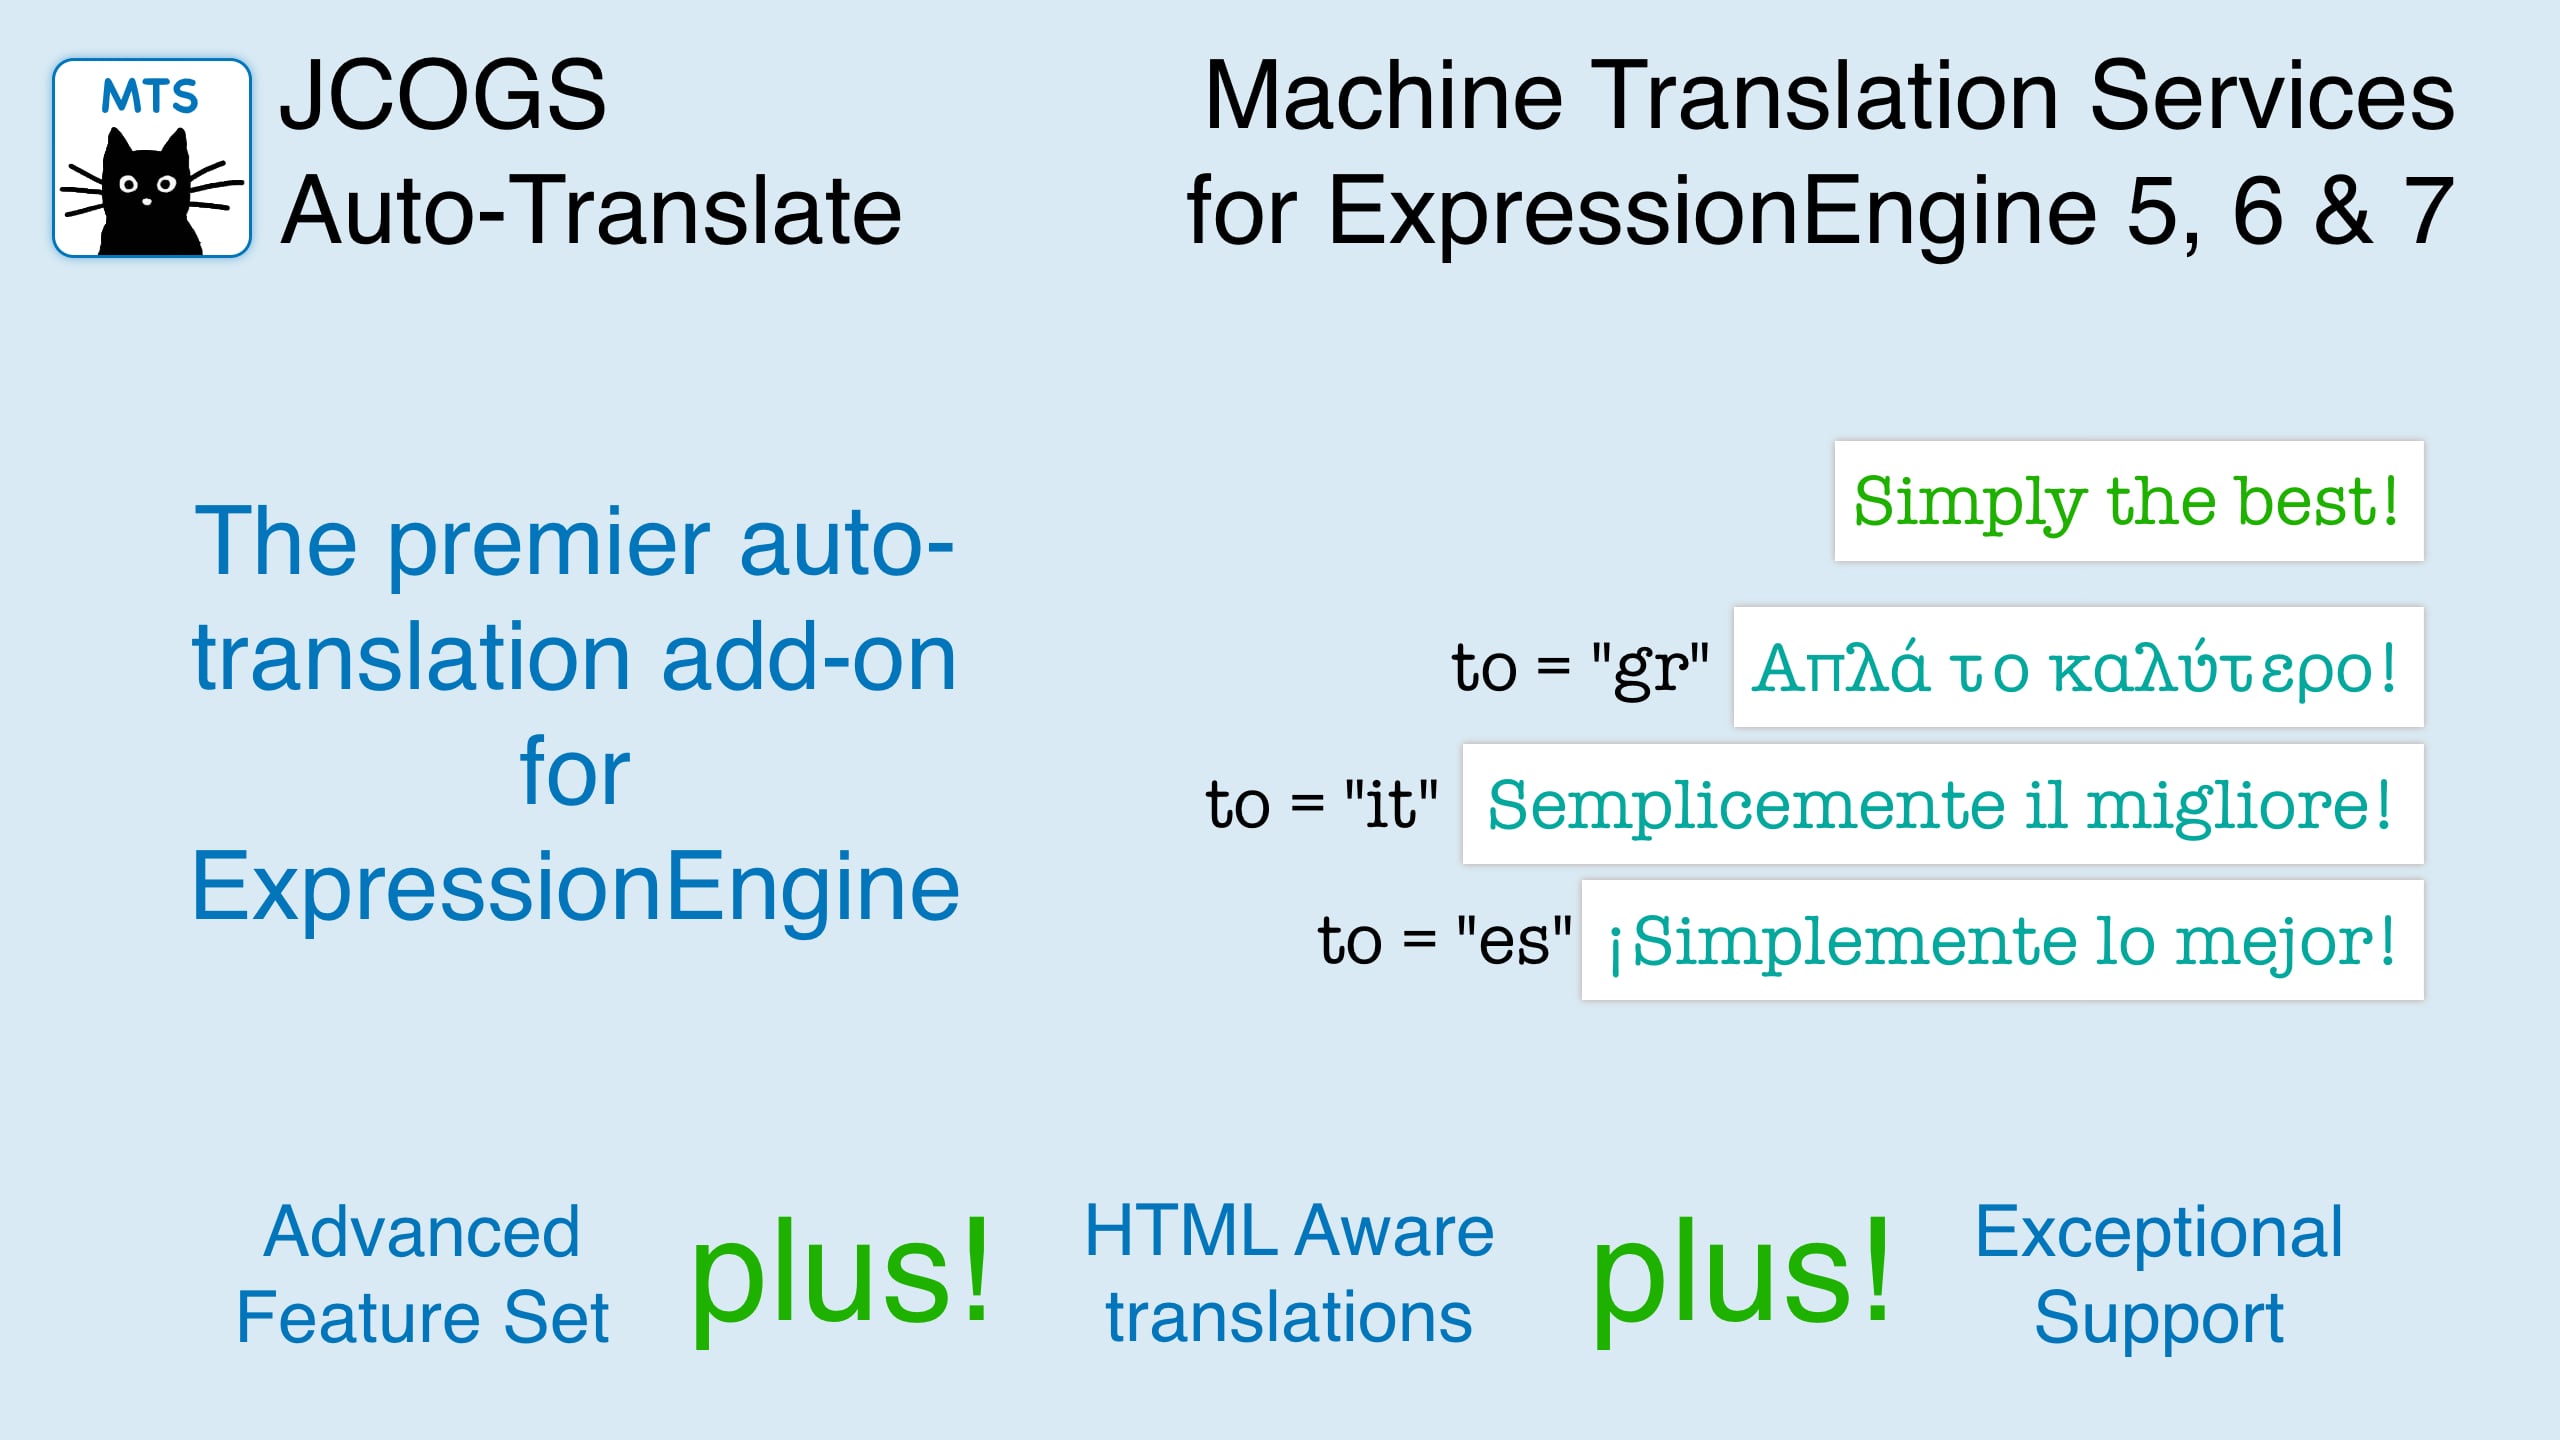 The premier Auto-Translation add-on for EE5, EE6 and EE7